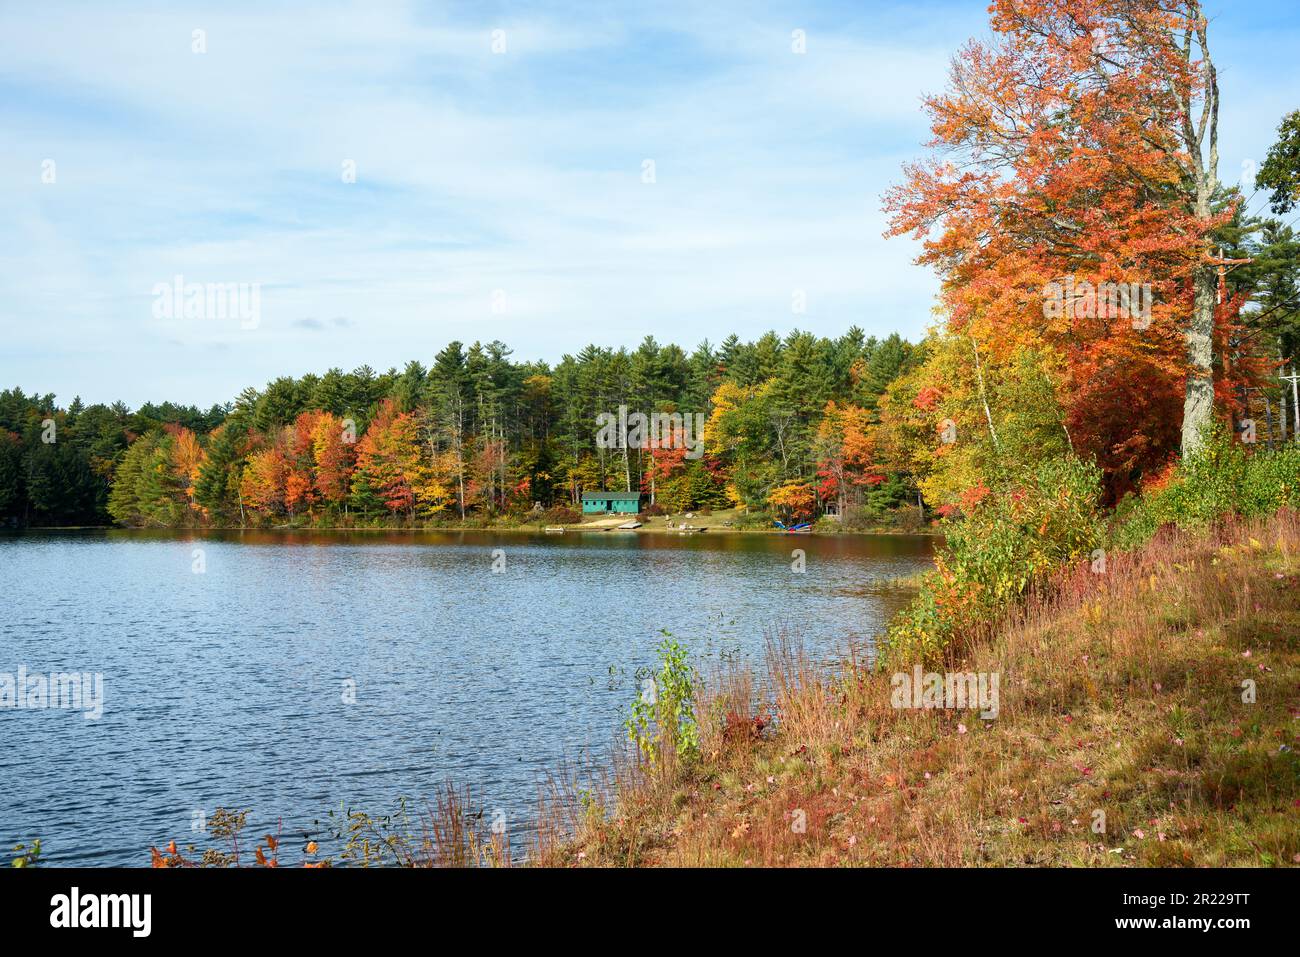 Beautiful lake surrounded by a thick forest in autumn. A holiday cabin is visible among the trees near the shore of the lake. Stock Photo